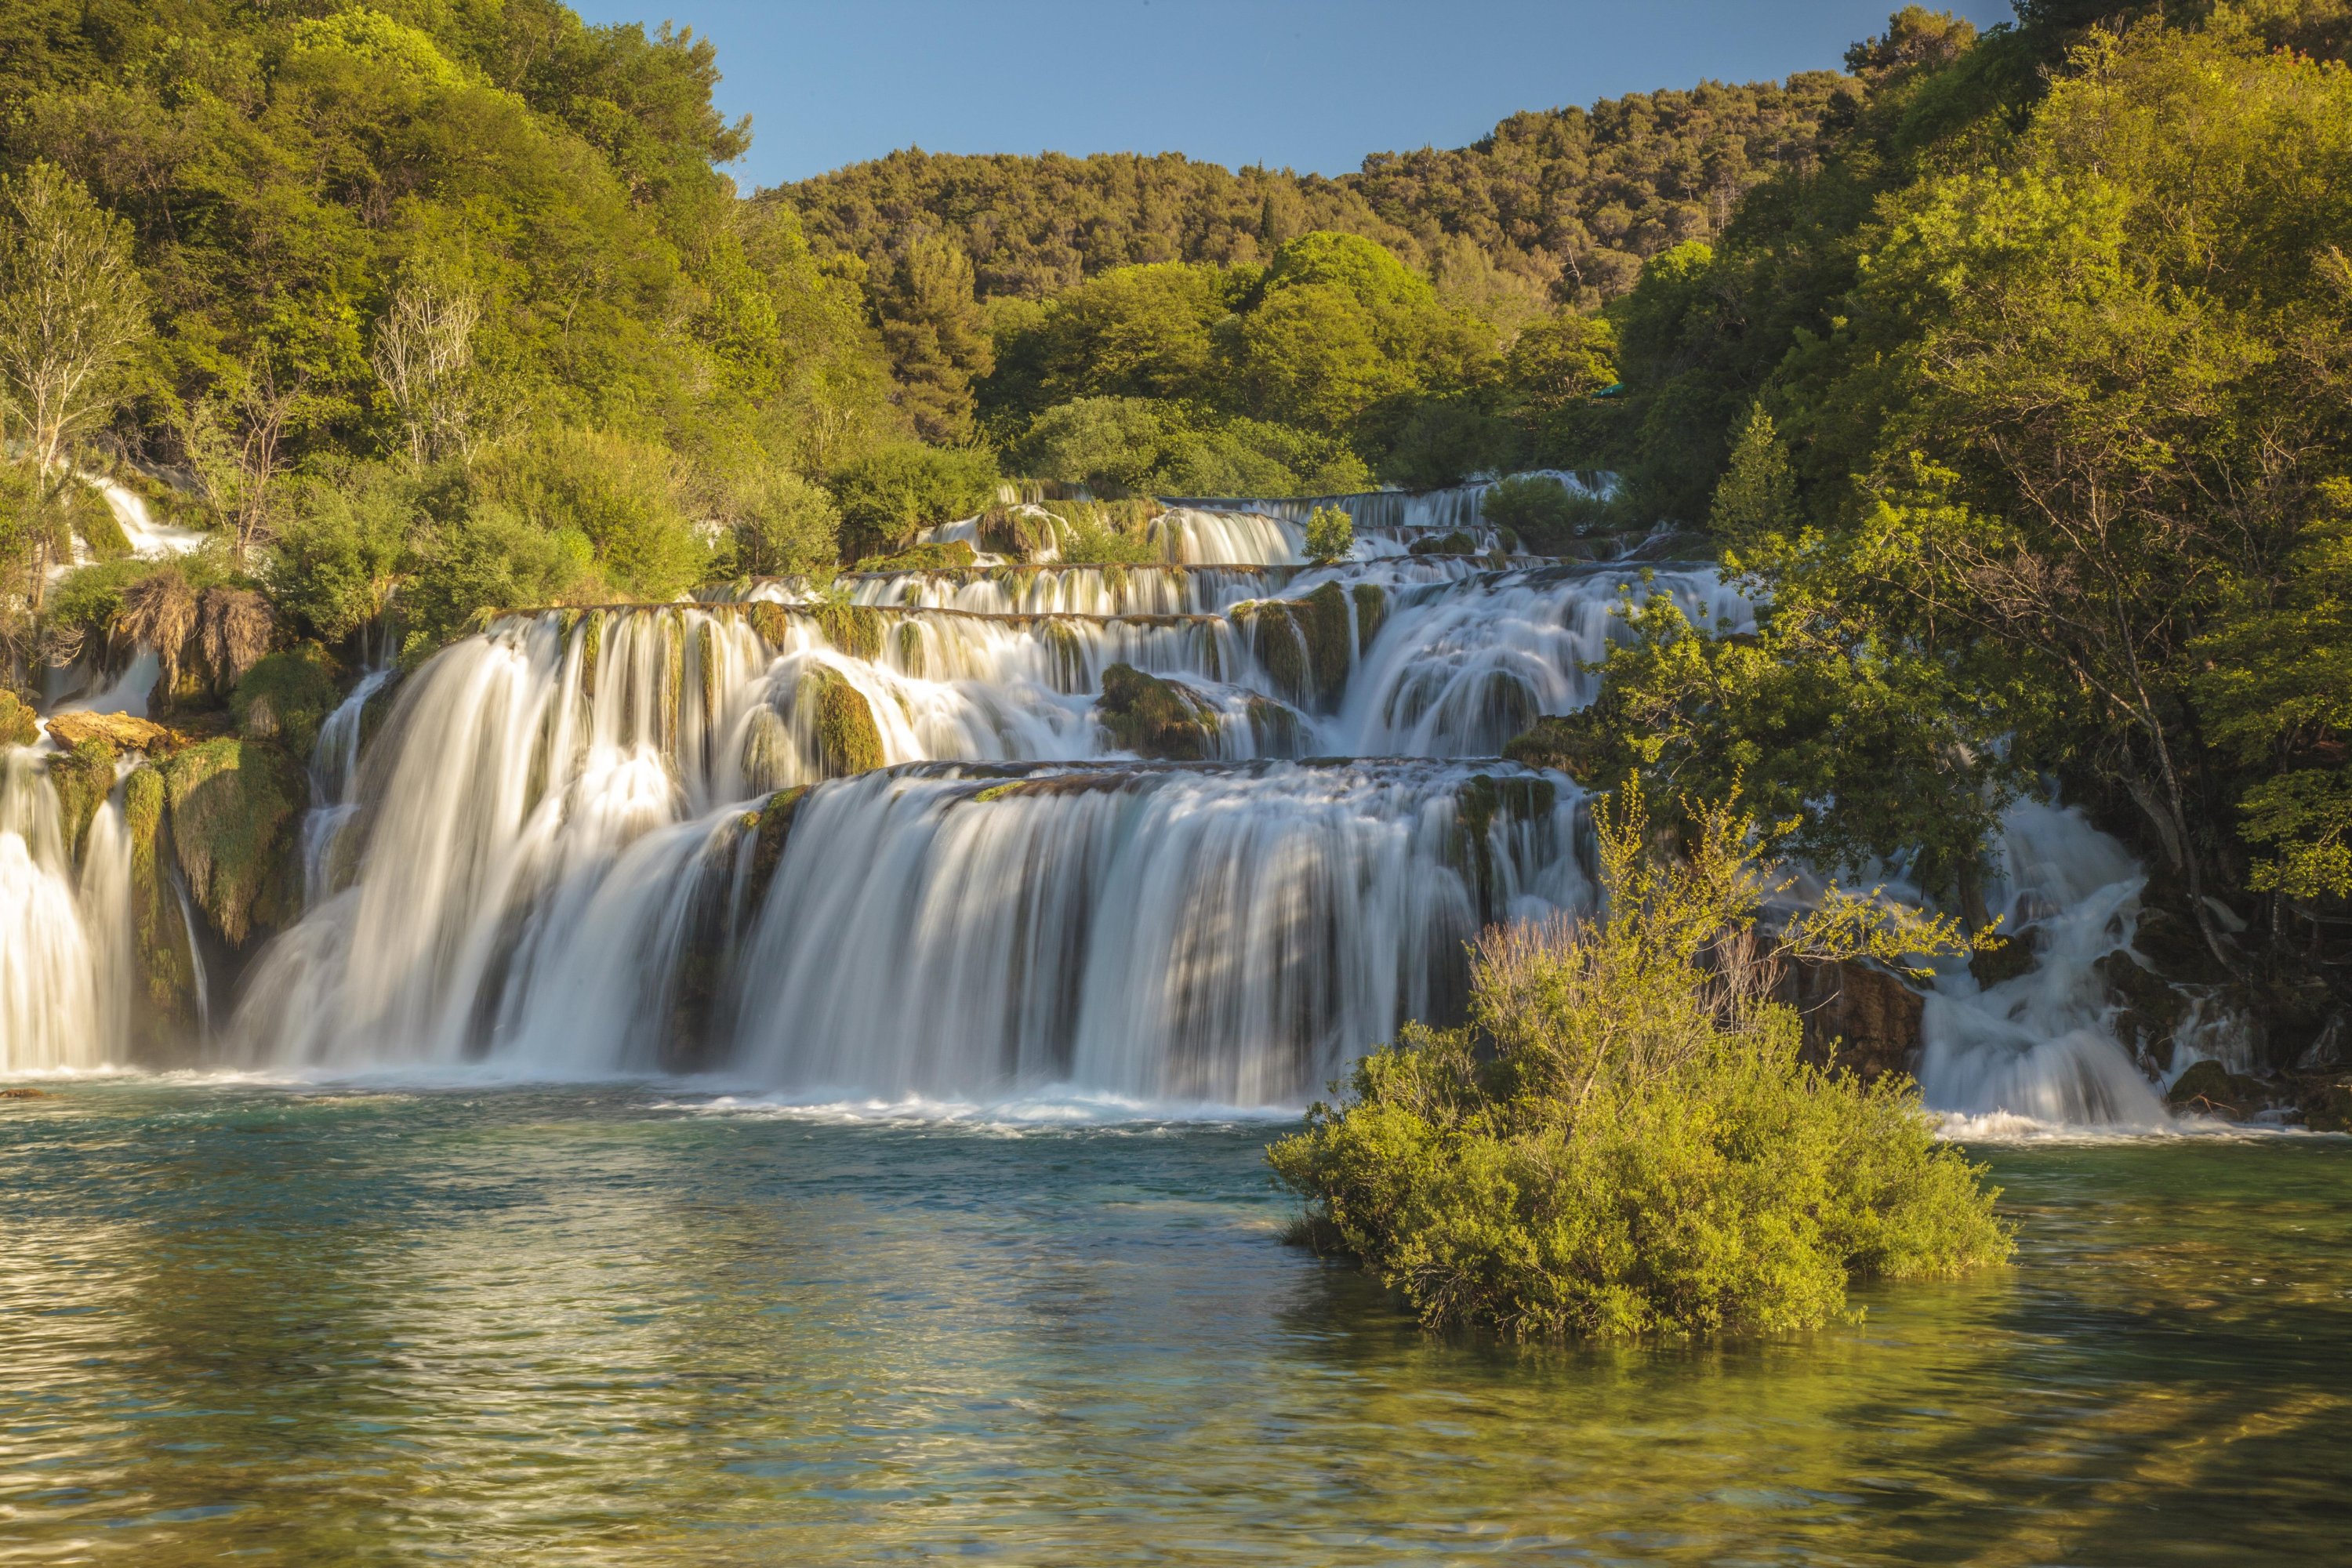 The Skradinski Buk waterfall, a flight of 17 travertine steps framed by willow and pine trees, is the most famous from Croatia